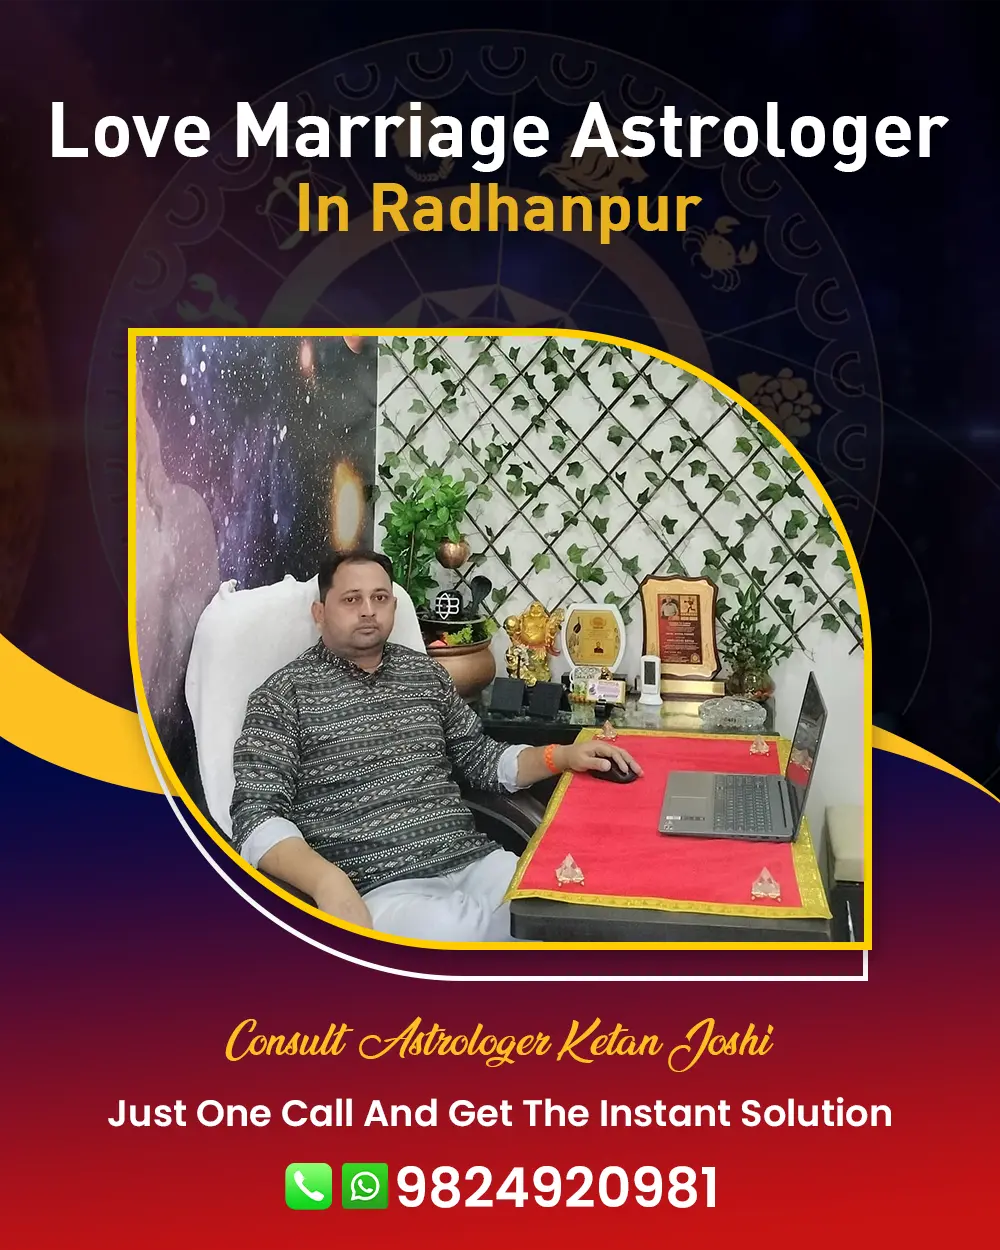 Love Marriage Astrologer In Radhanpur